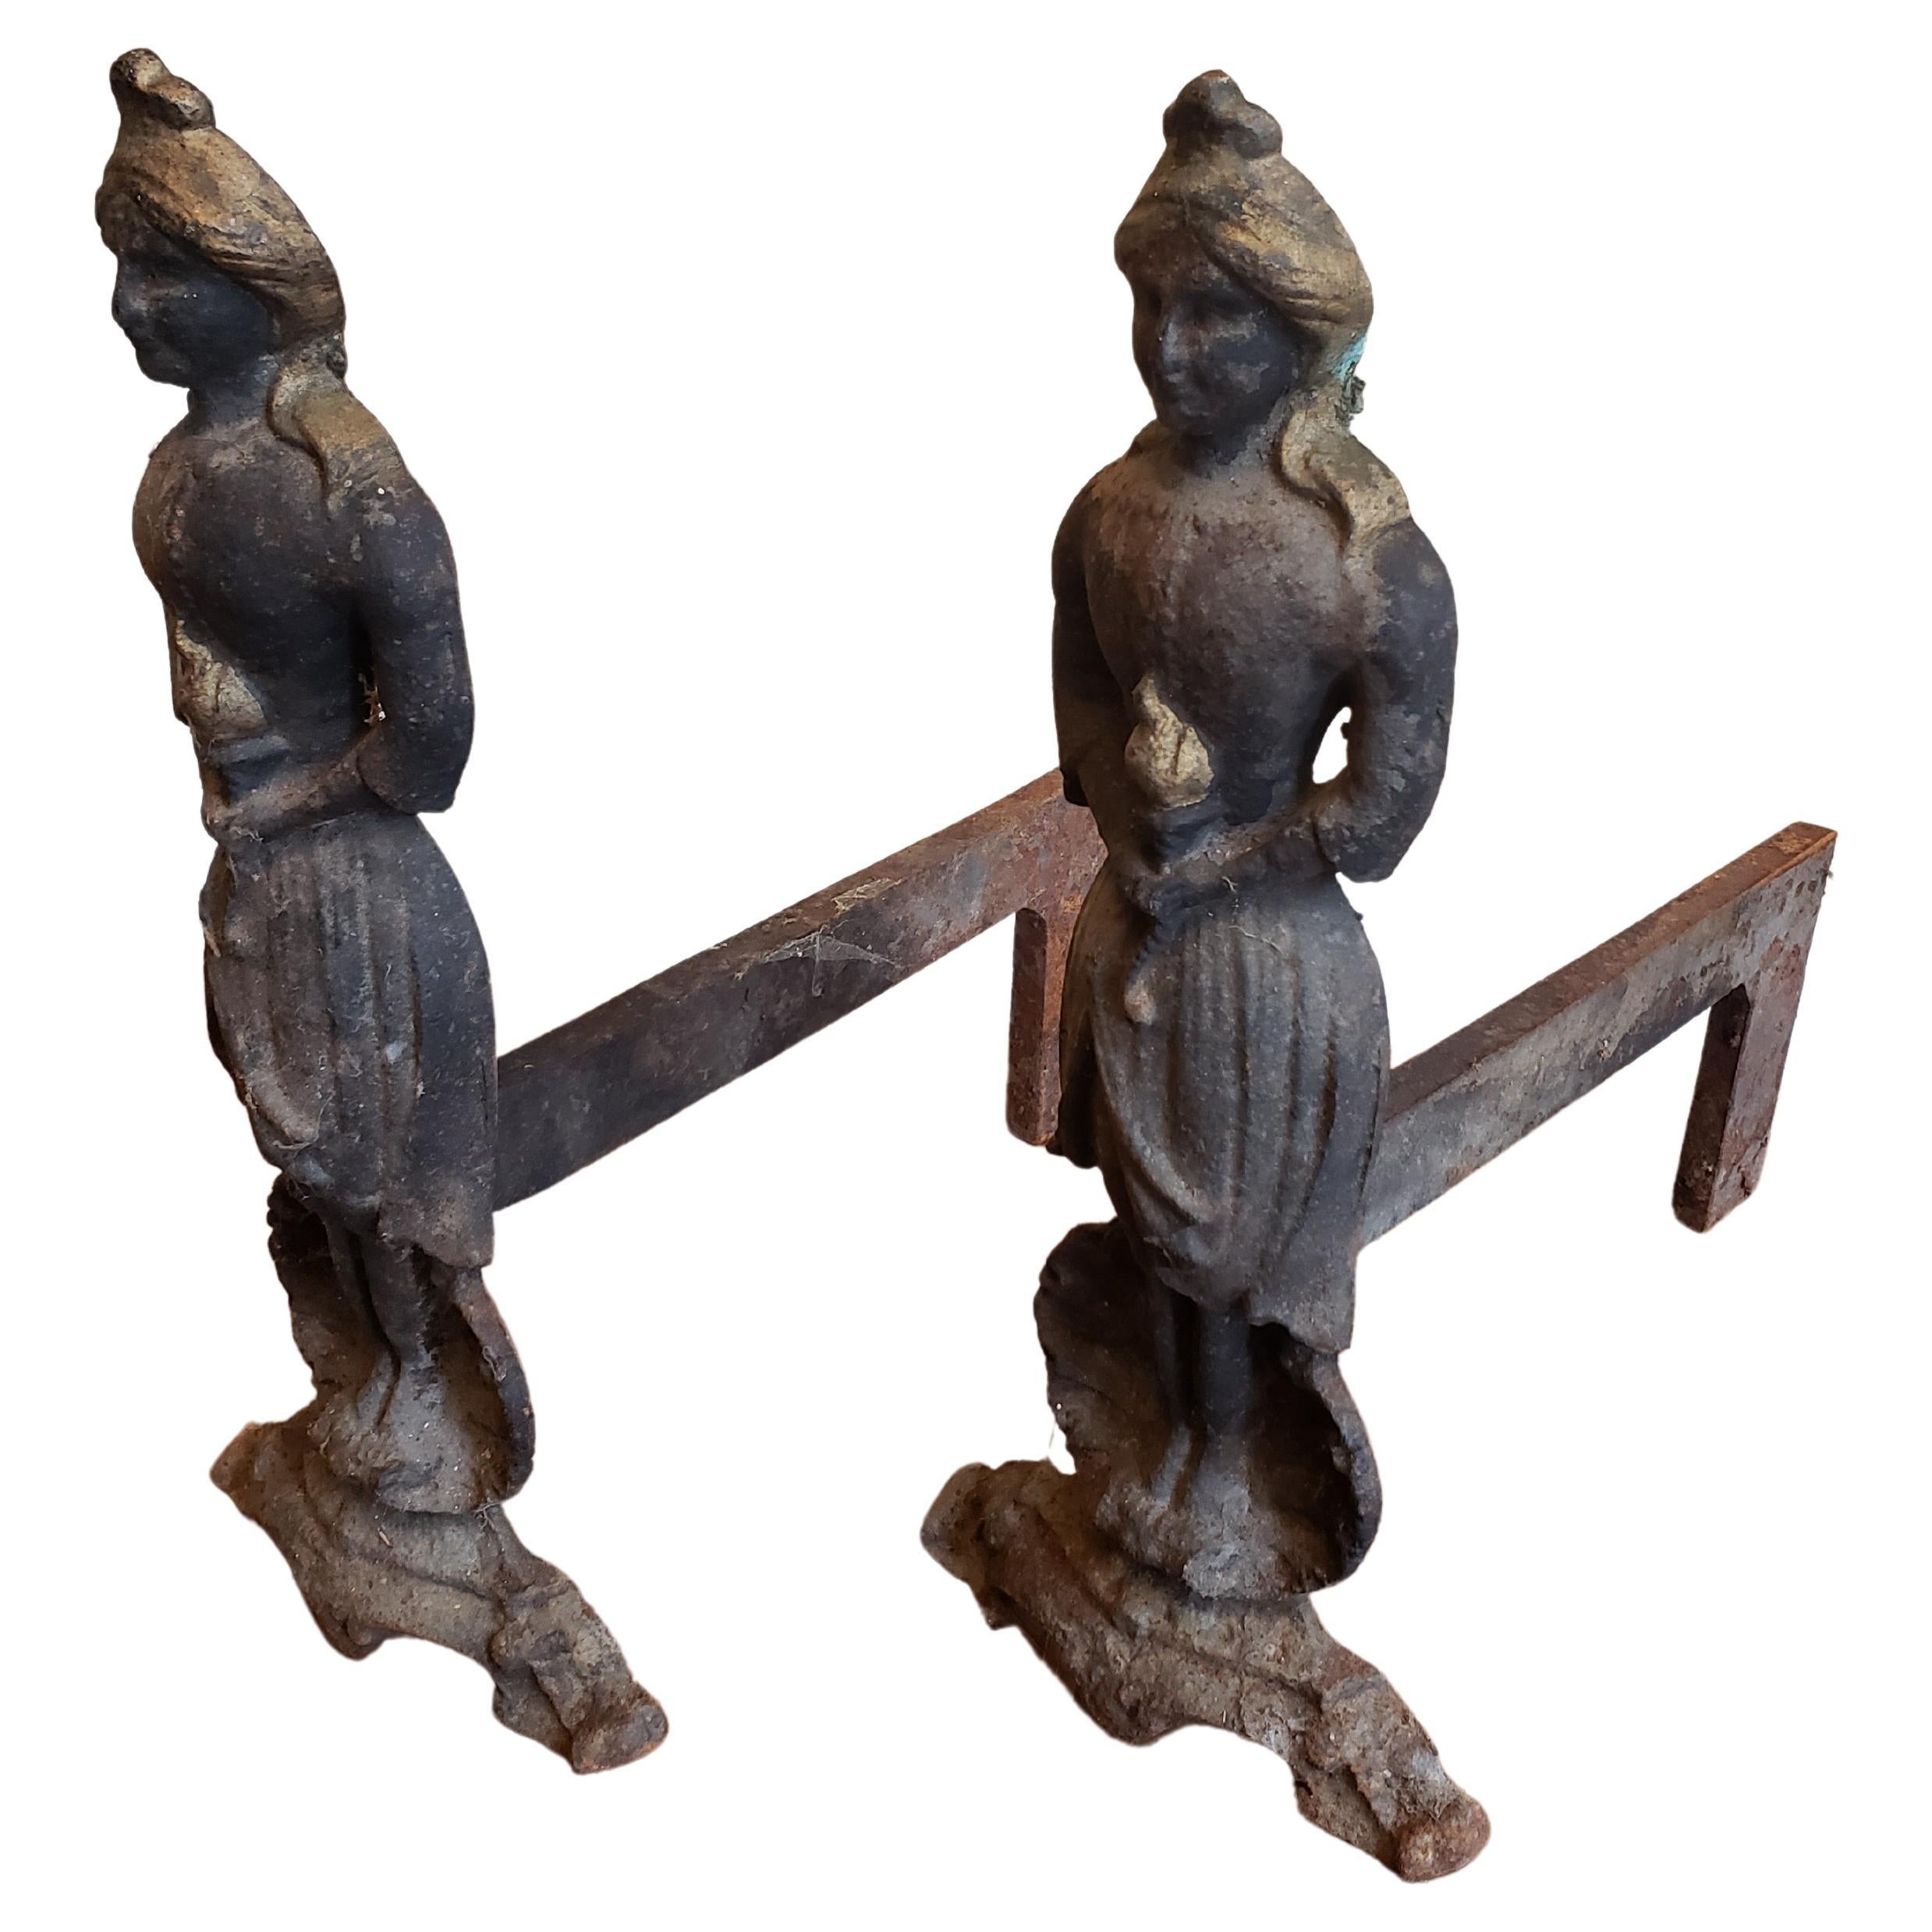 Antique Figural Cast and Wrought Iron Fireplace Andersons, Circa 1860s, a Pair For Sale 3